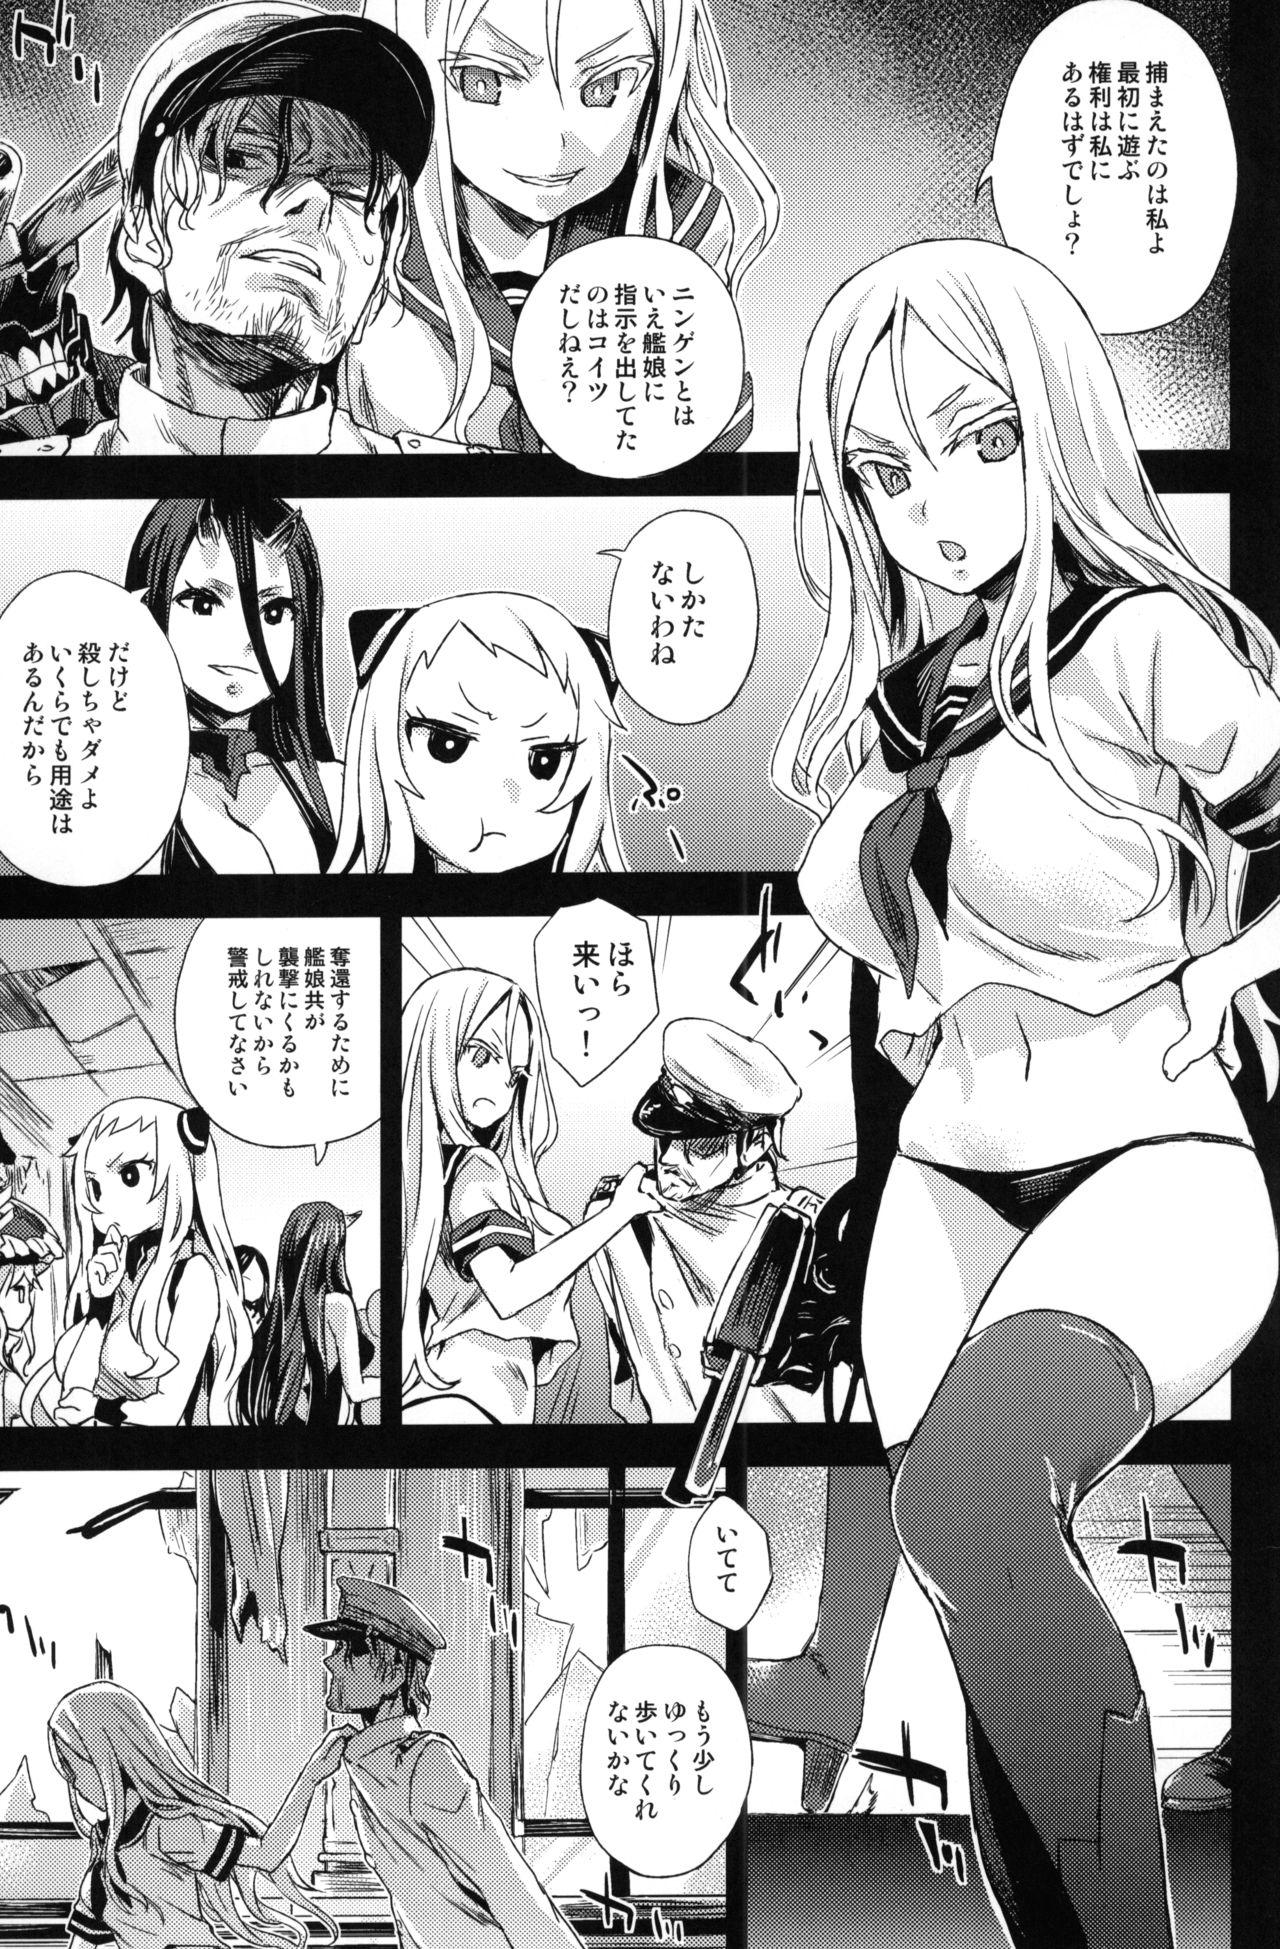 Ametur Porn VictimGirls 17 SOS - Kantai collection Storyline - Page 4